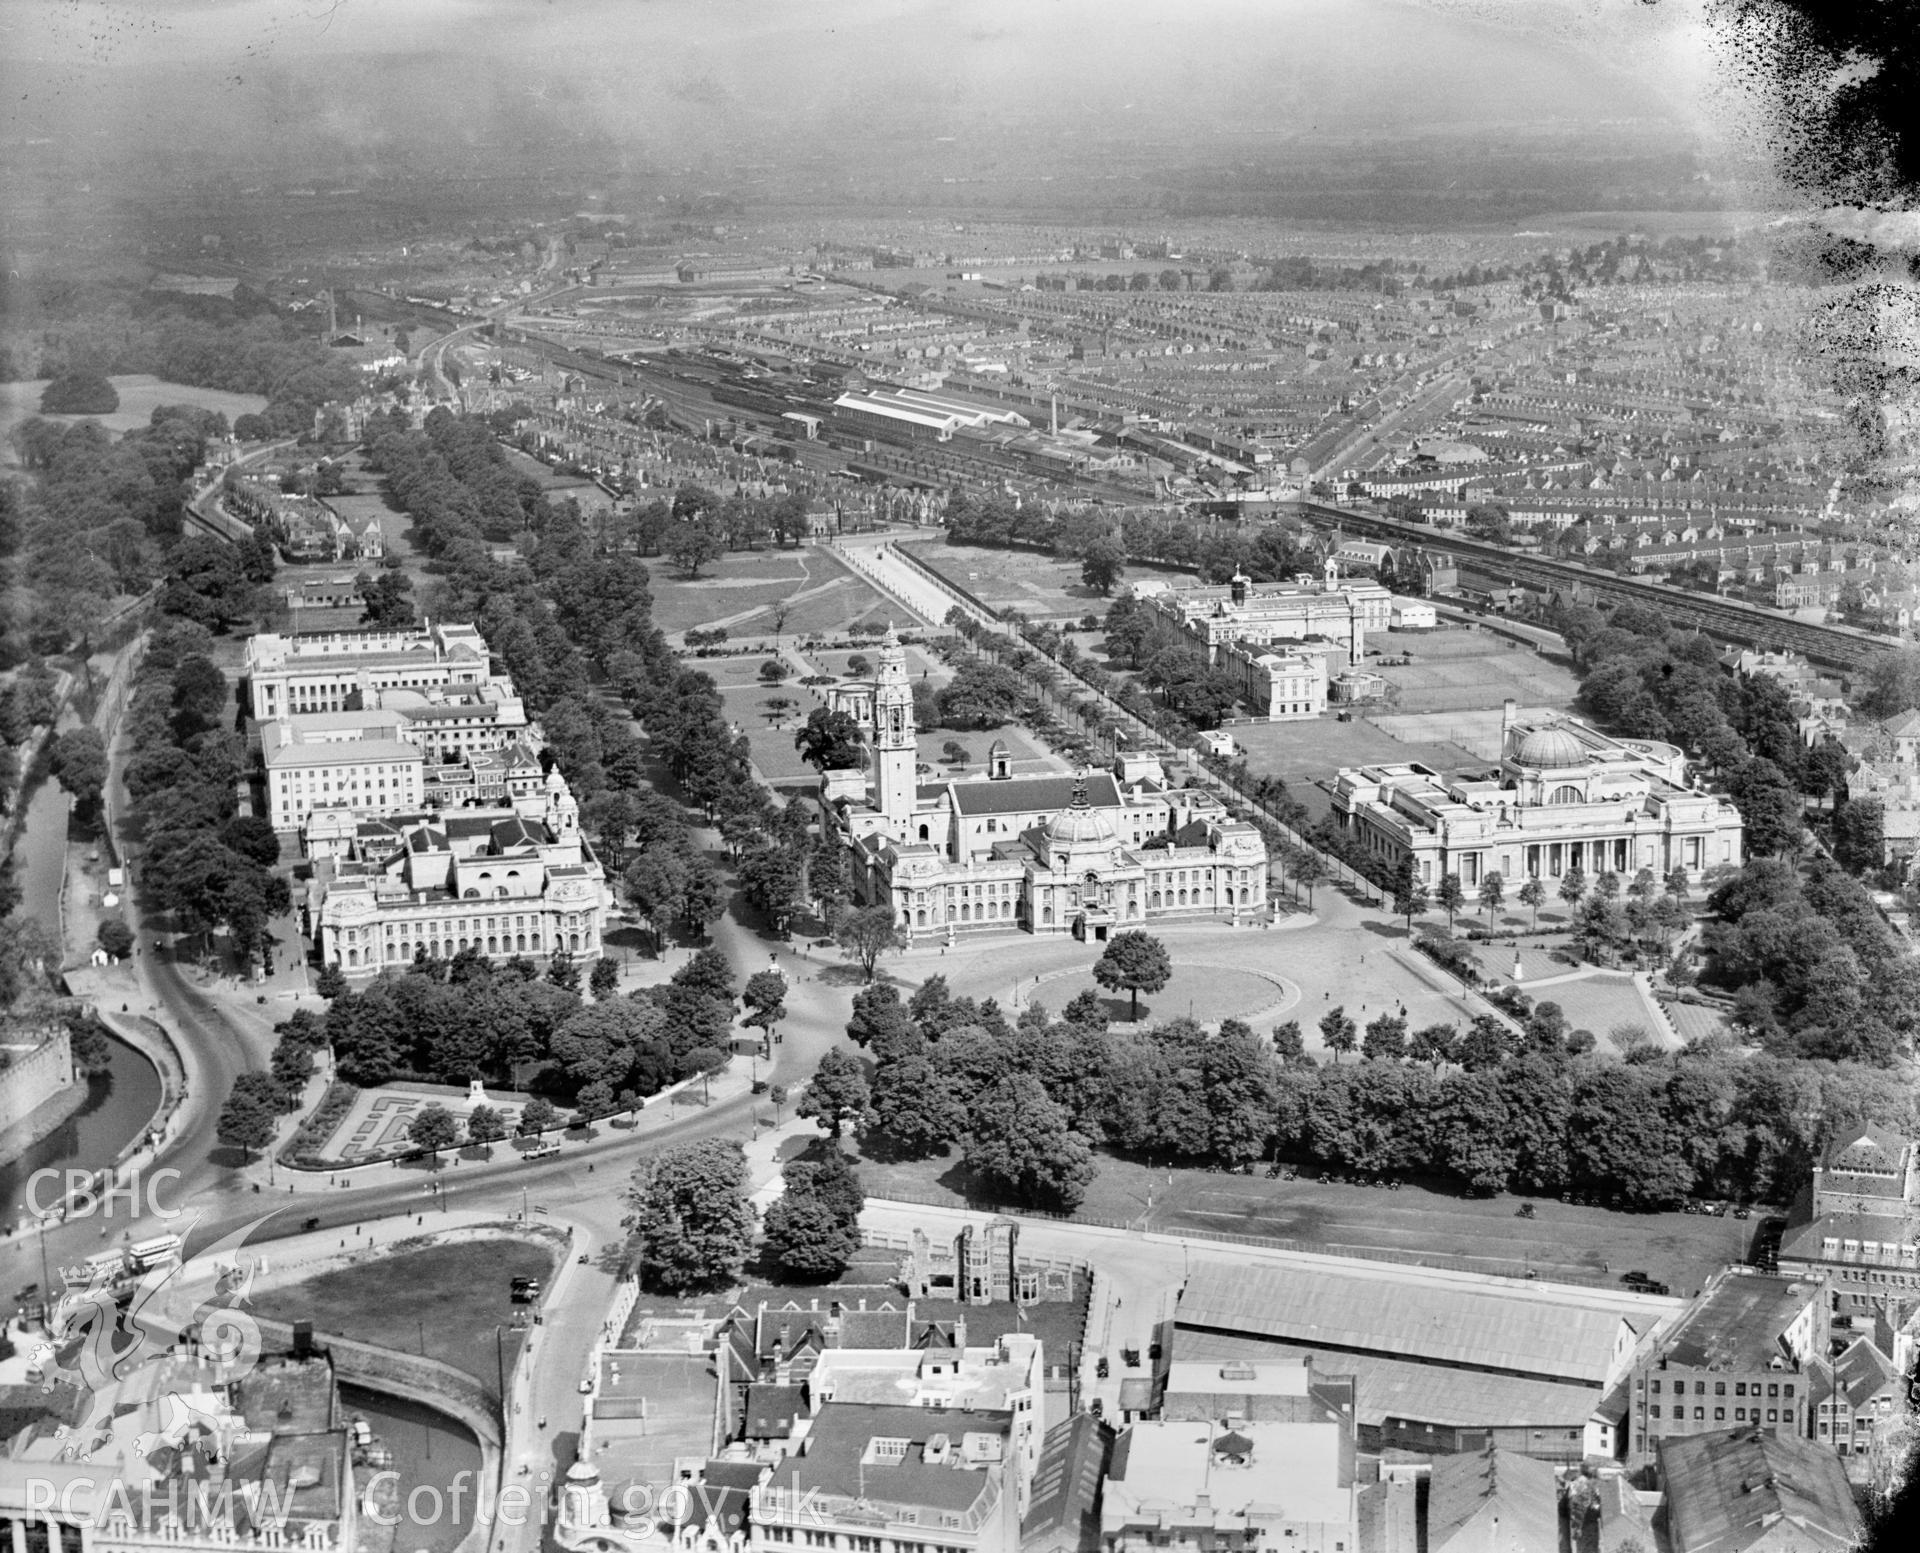 View of Cardiff Civic Centre, Cathays Park, oblique aerial view. 5?x4? black and white glass plate negative.